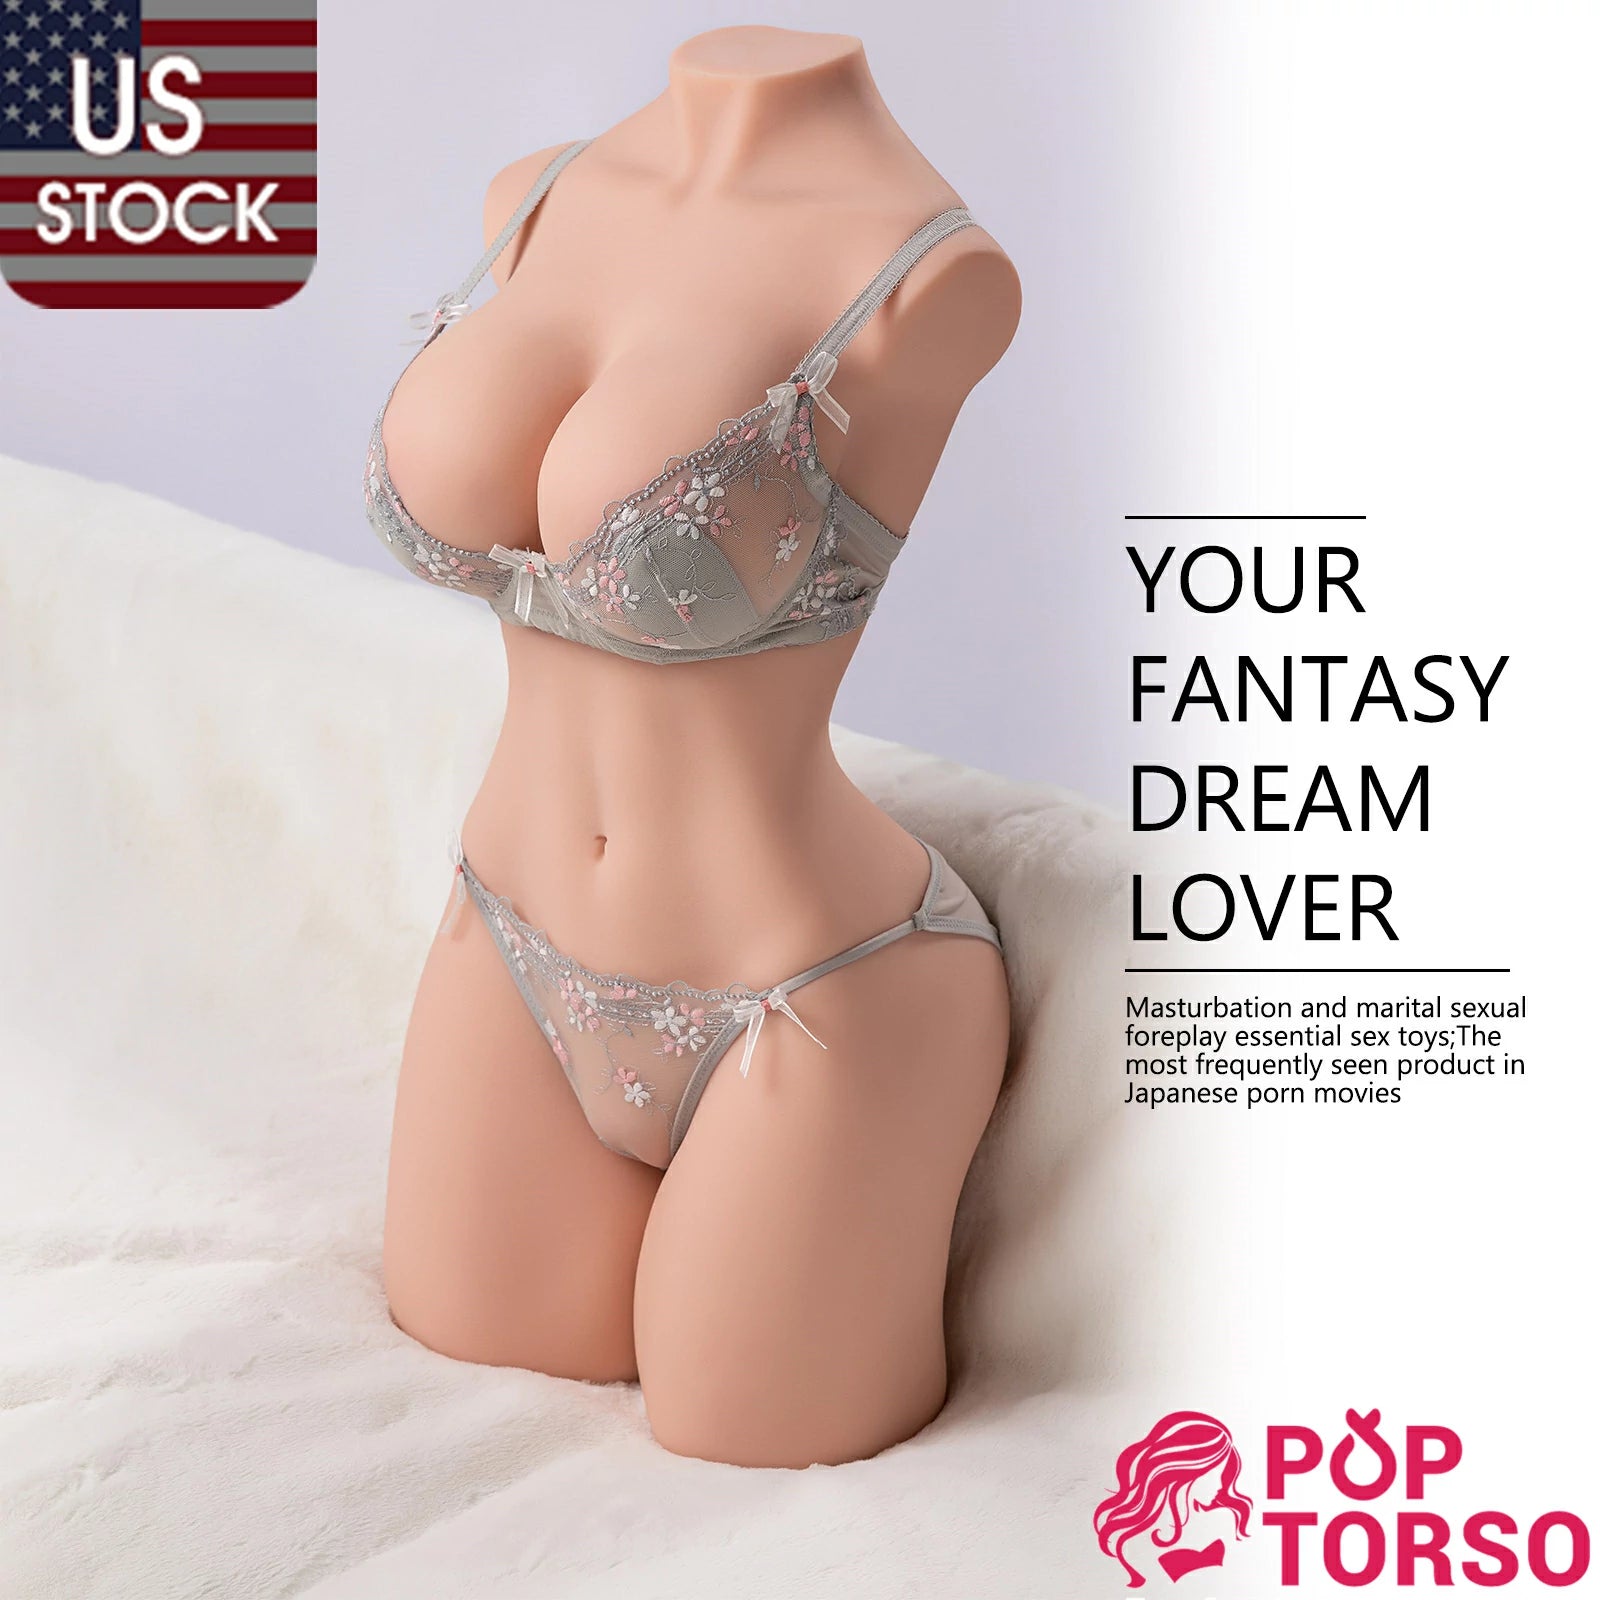  TANTALY 41.8LB Sex Doll Sex Toys for Men Male Masturbator with  Tight Vaginal Anal Realistic Big Breast and Butt Silicone Life Size Sex  Dolls Female Torso Adult Doll for Men Pleasure